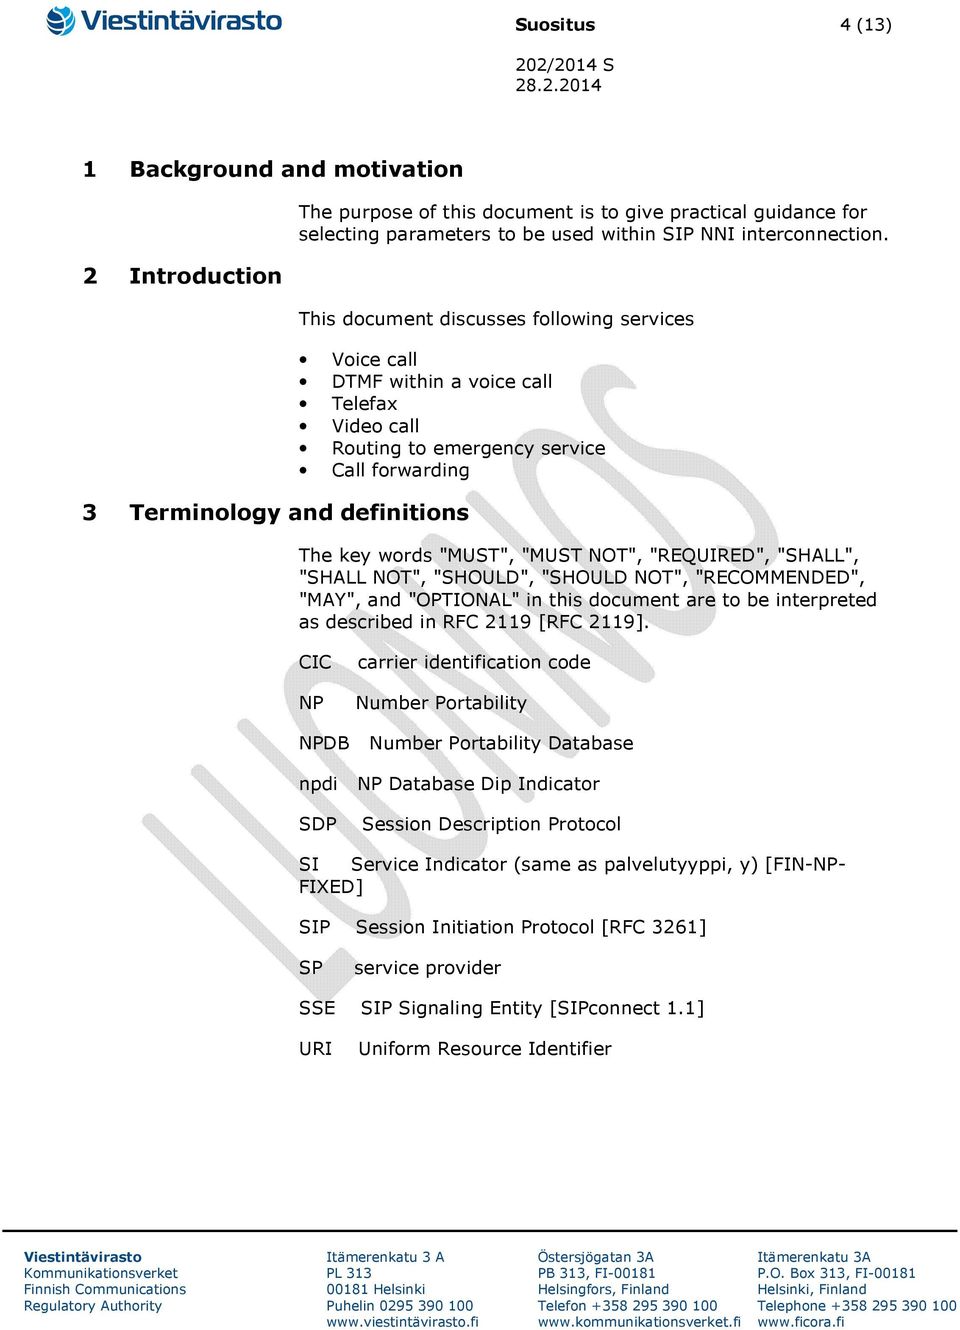 "MUST NOT", "REQUIRED", "SHALL", "SHALL NOT", "SHOULD", "SHOULD NOT", "RECOMMENDED", "MAY", and "OPTIONAL" in this document are to be interpreted as described in RFC 2119 [RFC 2119].